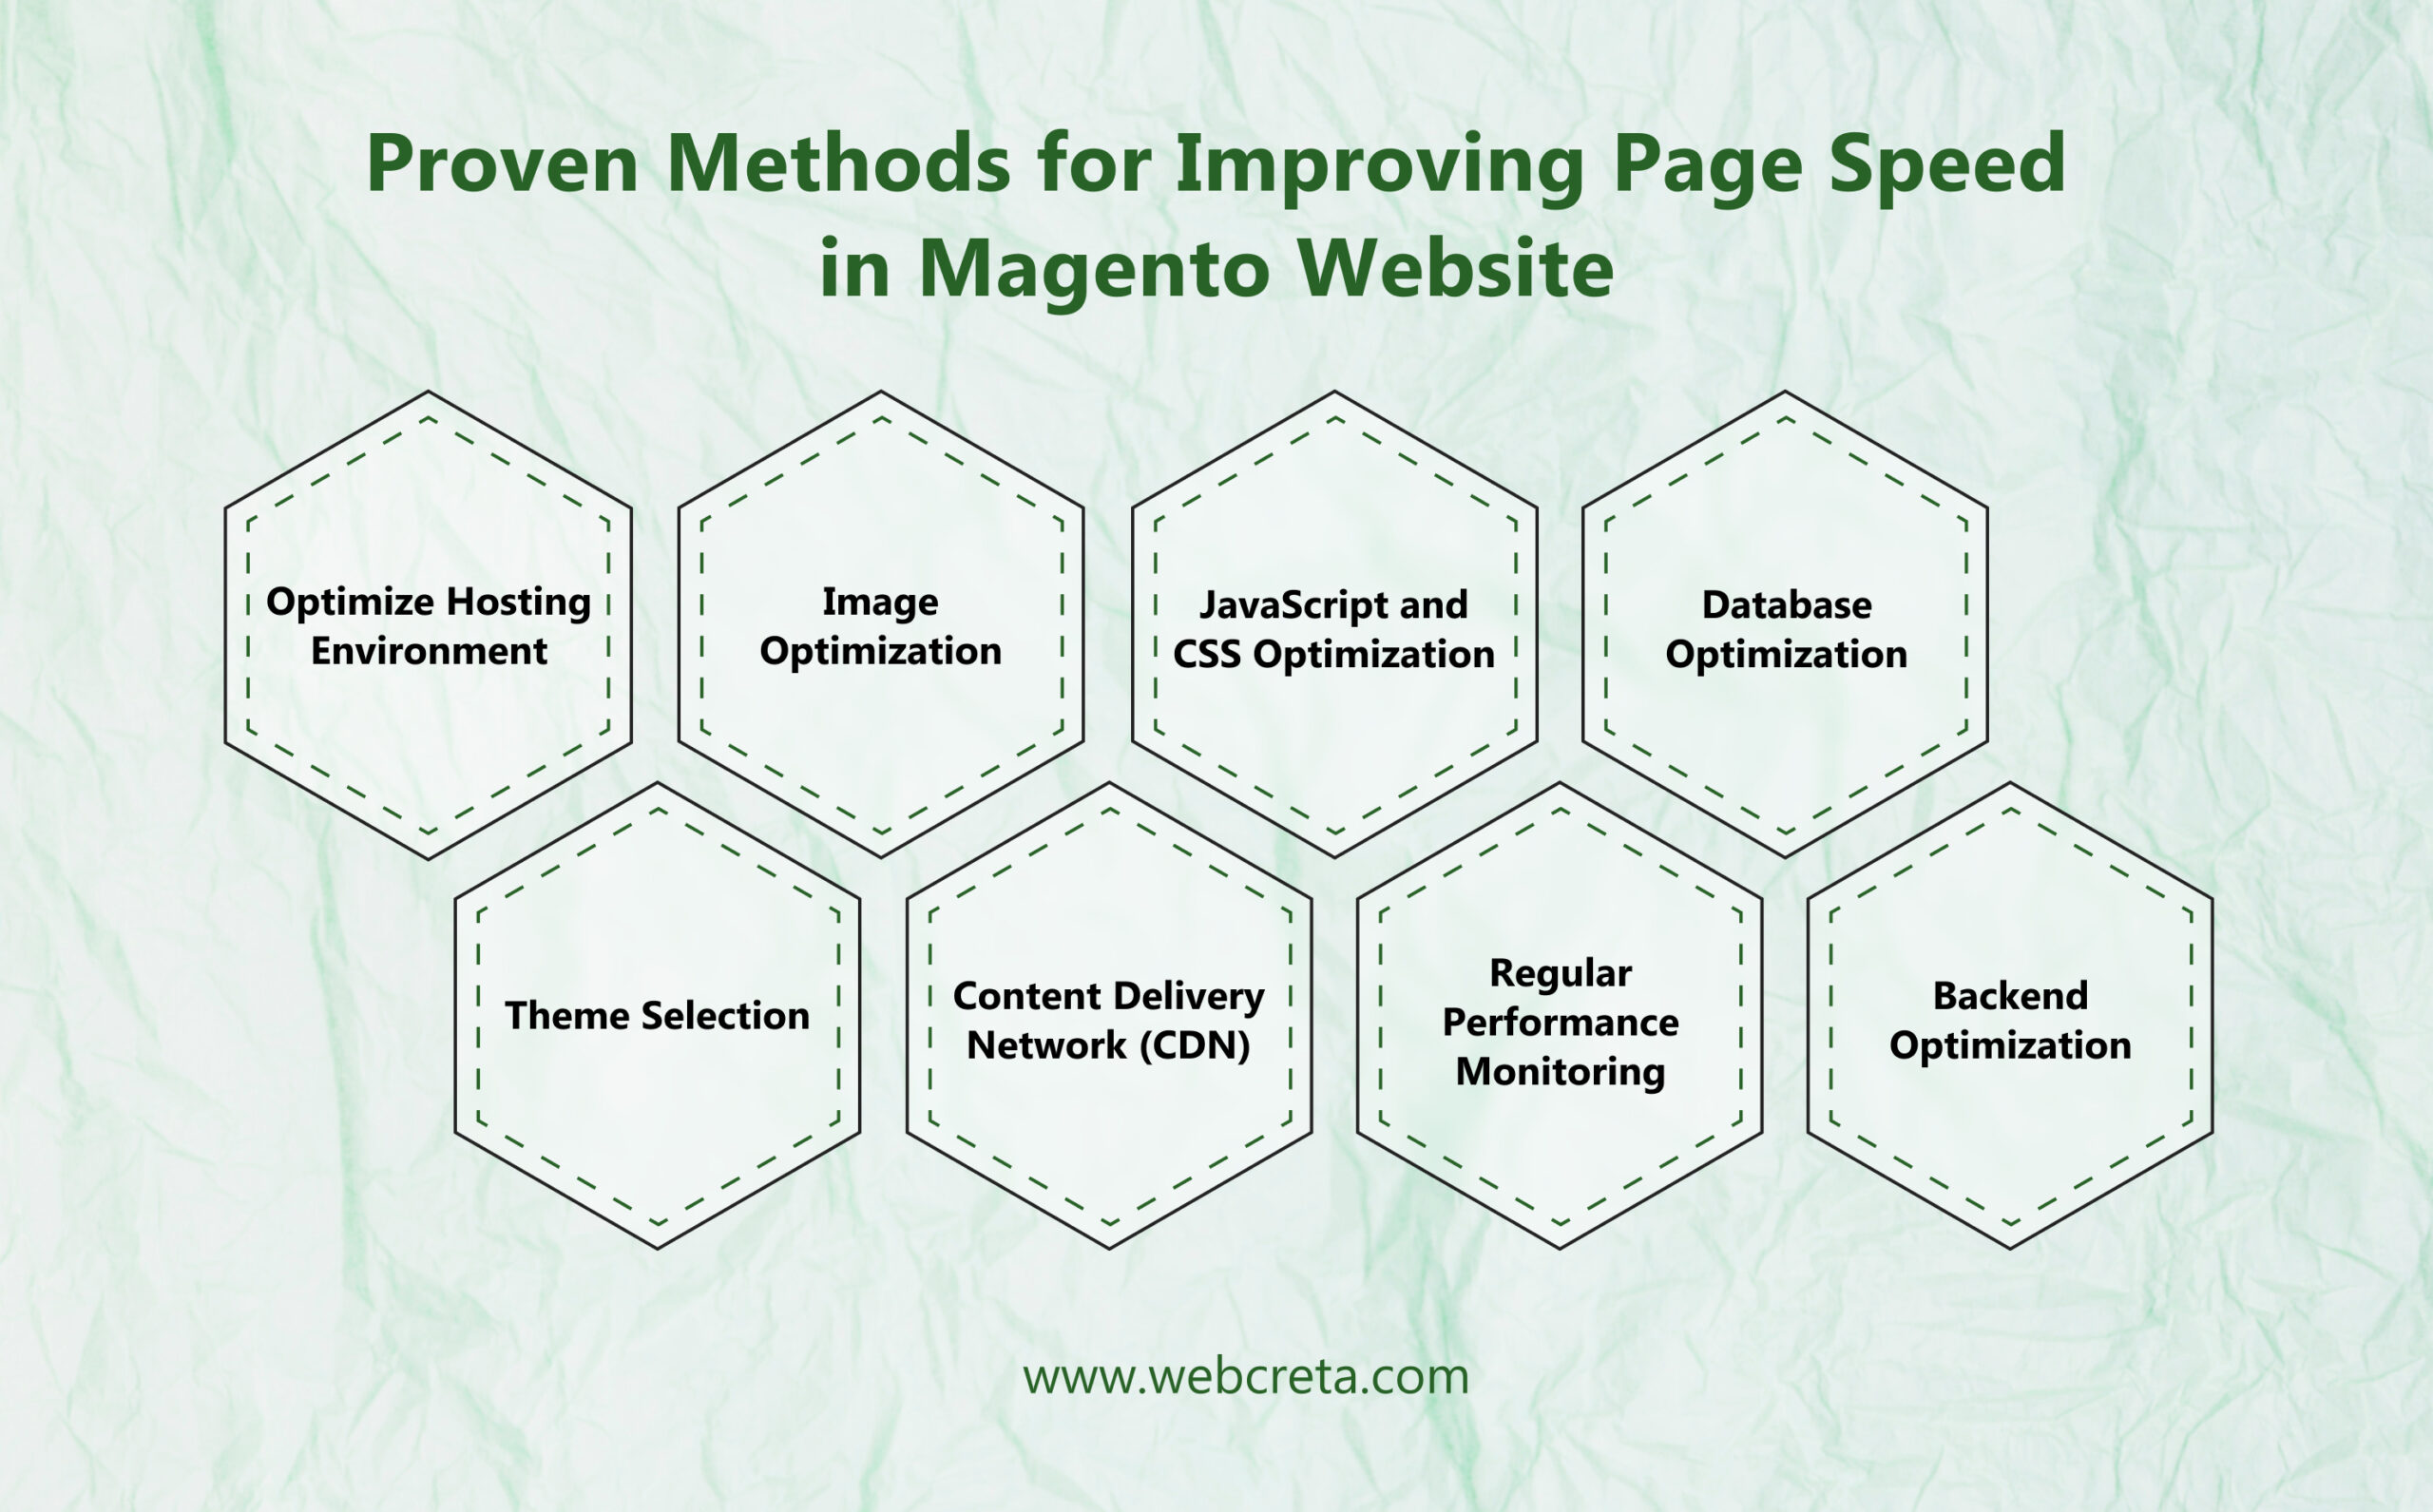 Proven Methods for Improving Page Speed in Magento Website